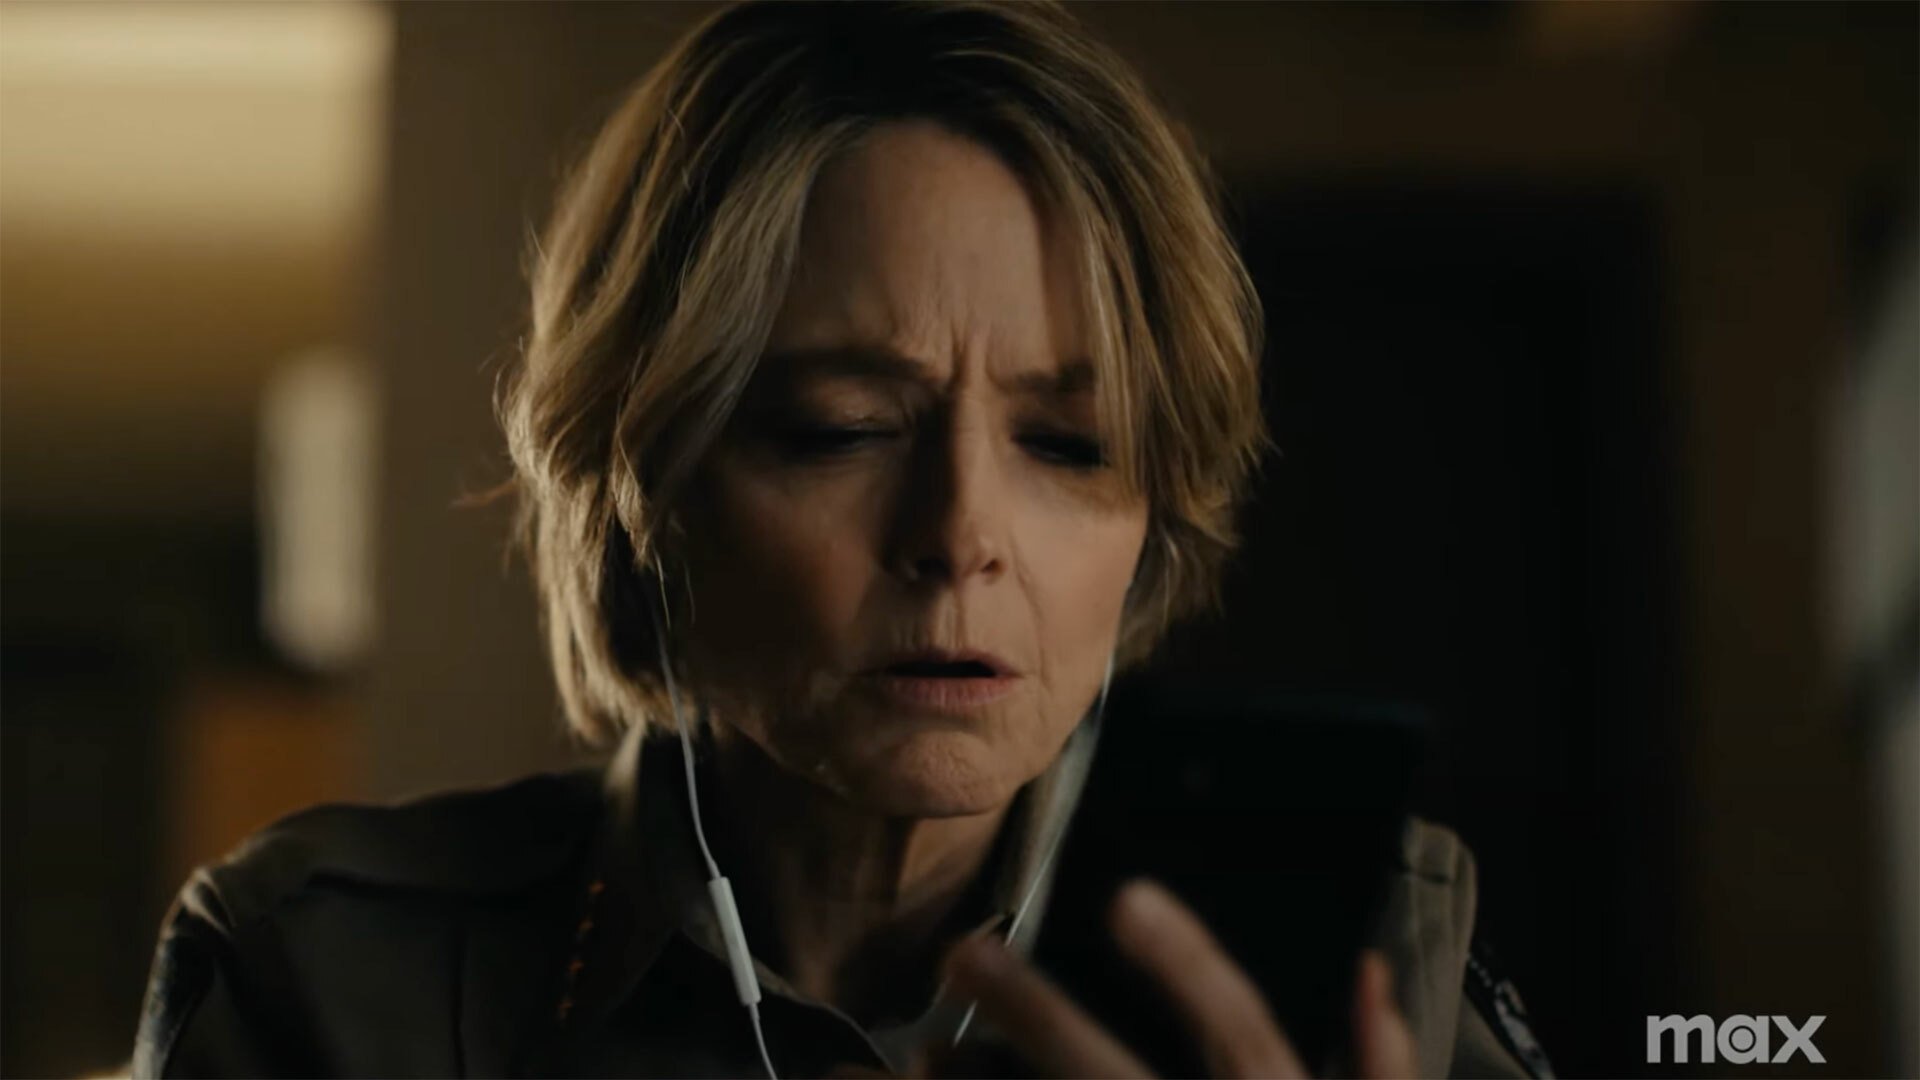 A woman wearing headphones frowns while looking at a phone.